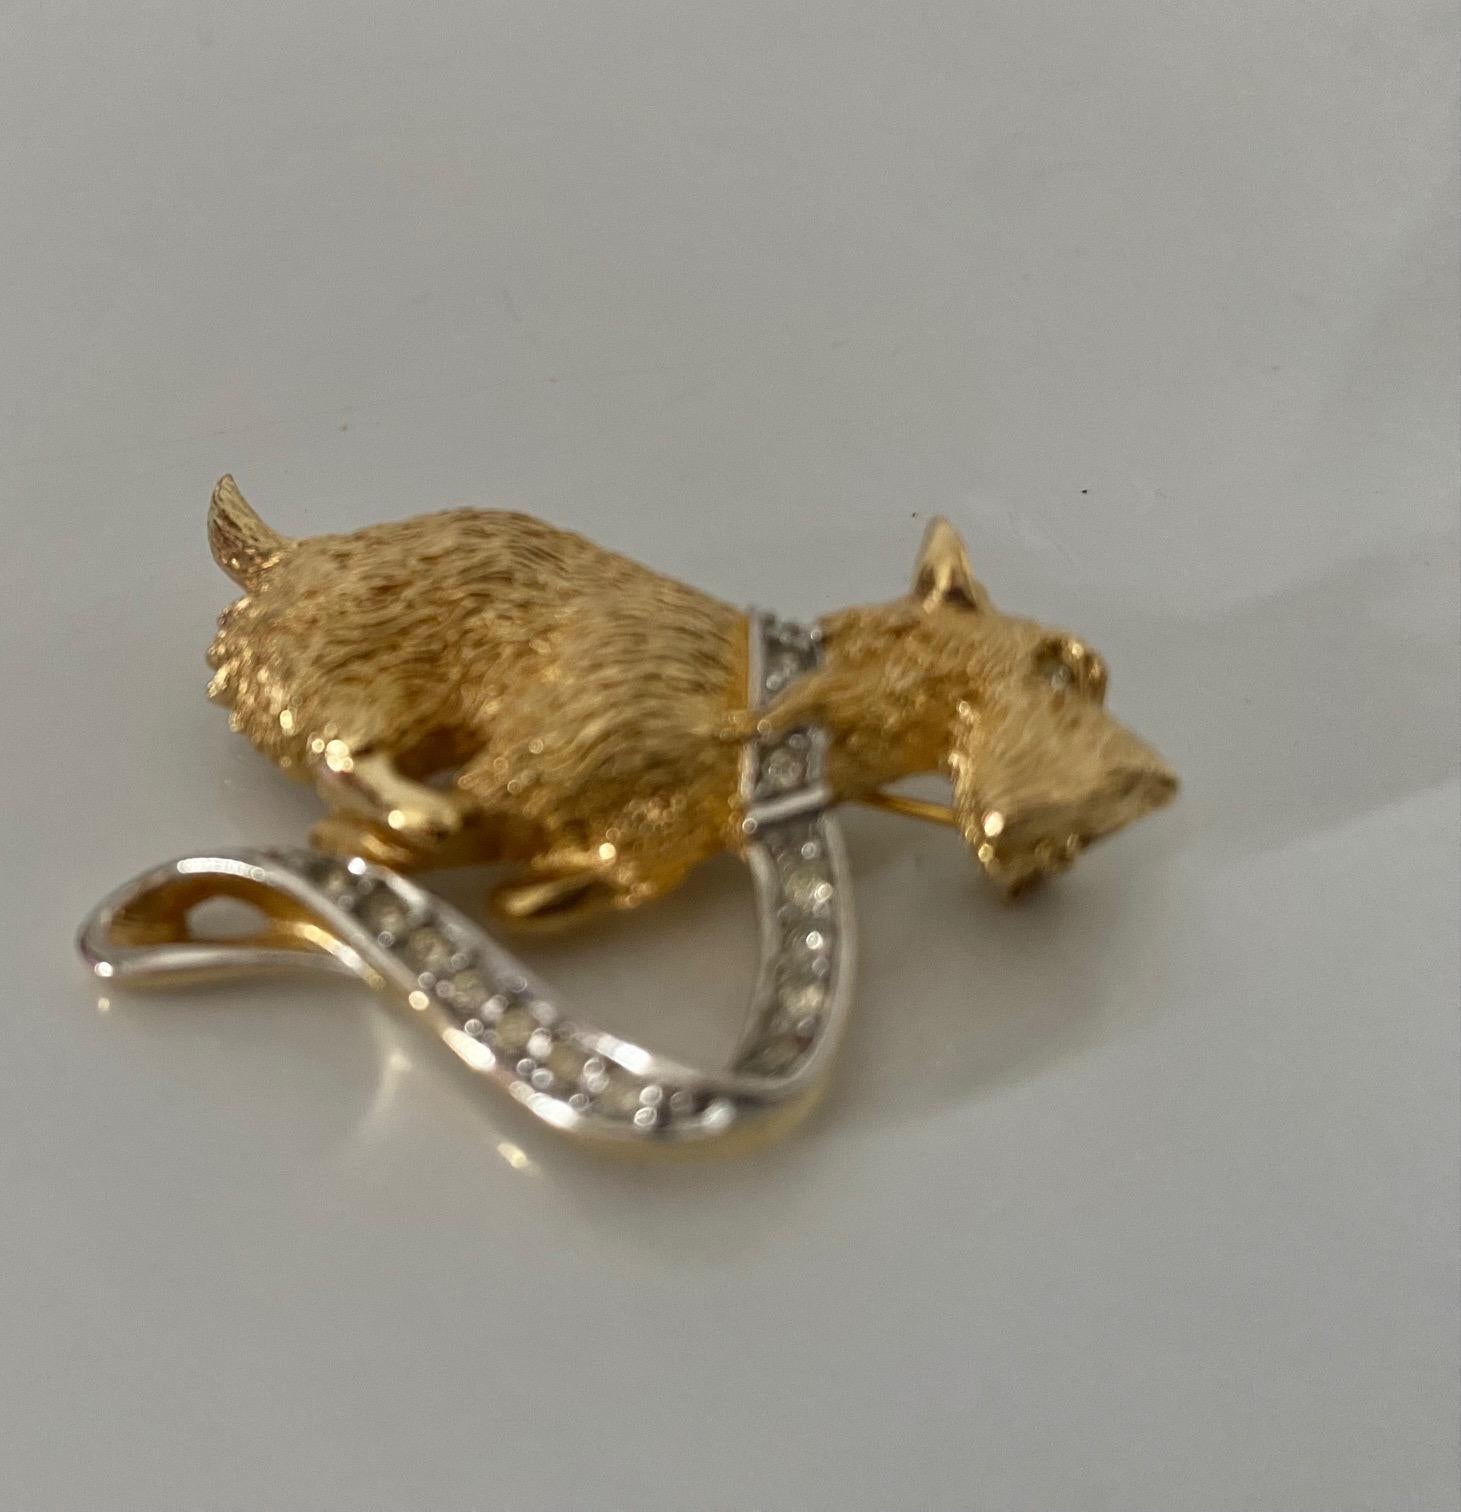 Burberrys Gold plated brooch featuring a terrier dog with crystal details.

Condition: 1980s, vintage, very good, minimal wear 

Dimensions: 4x4cm 